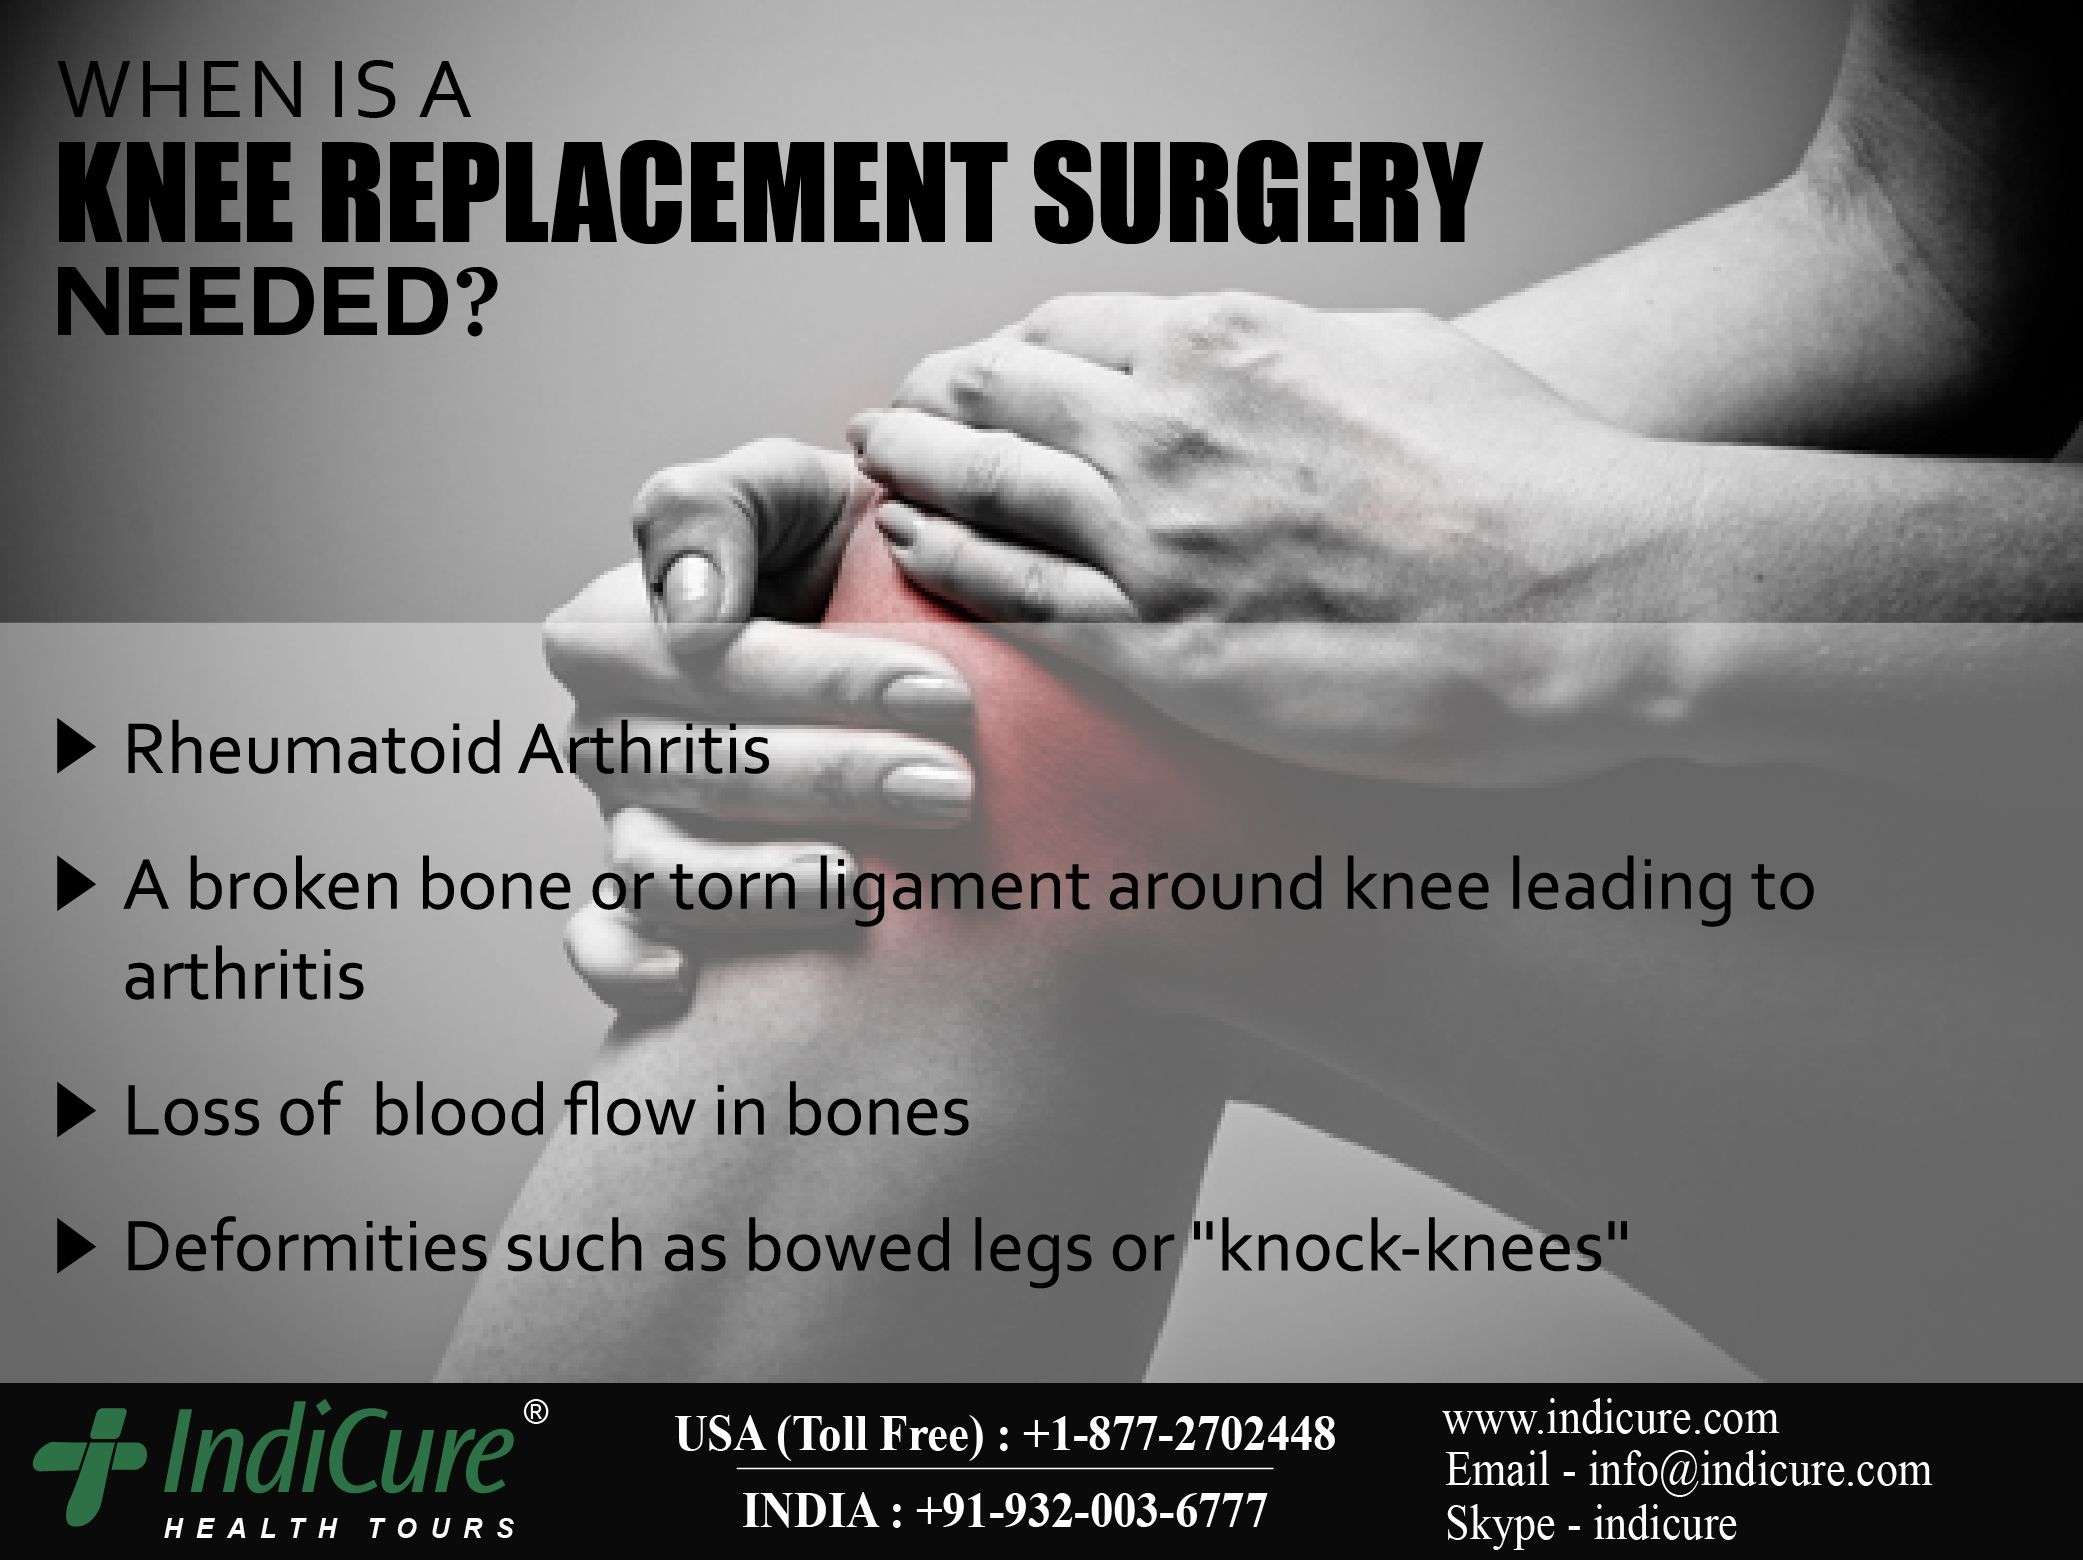 How Do I Know If I Need Knee Replacement Surgery?